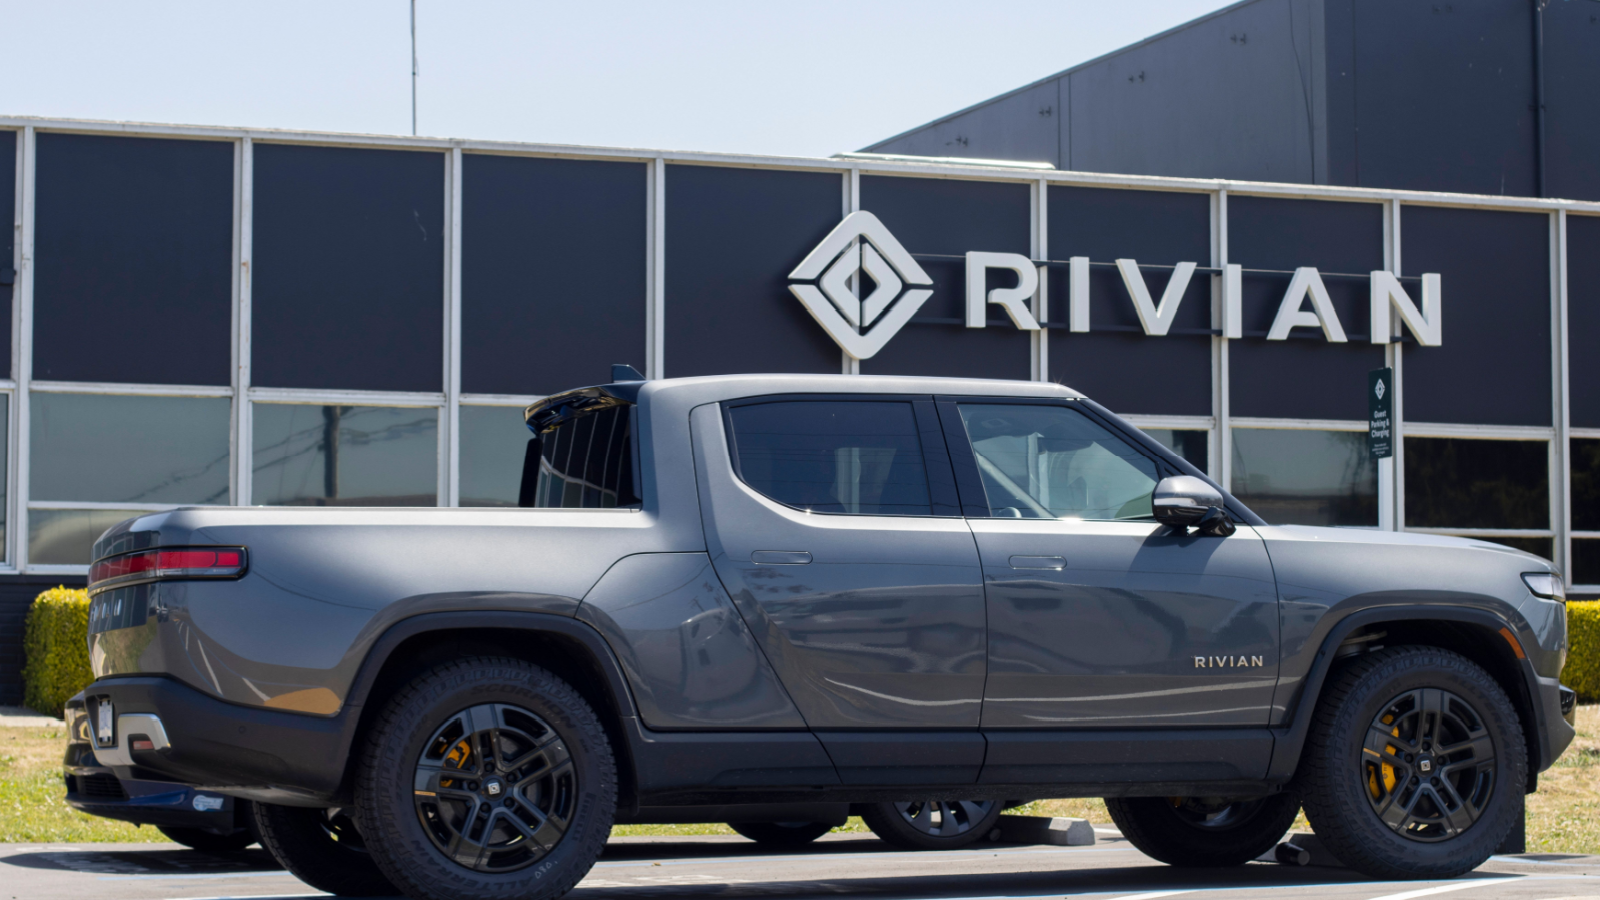 Rivian’s Rising Tide: Why the EV Dark Horse Might Surprise This Fall